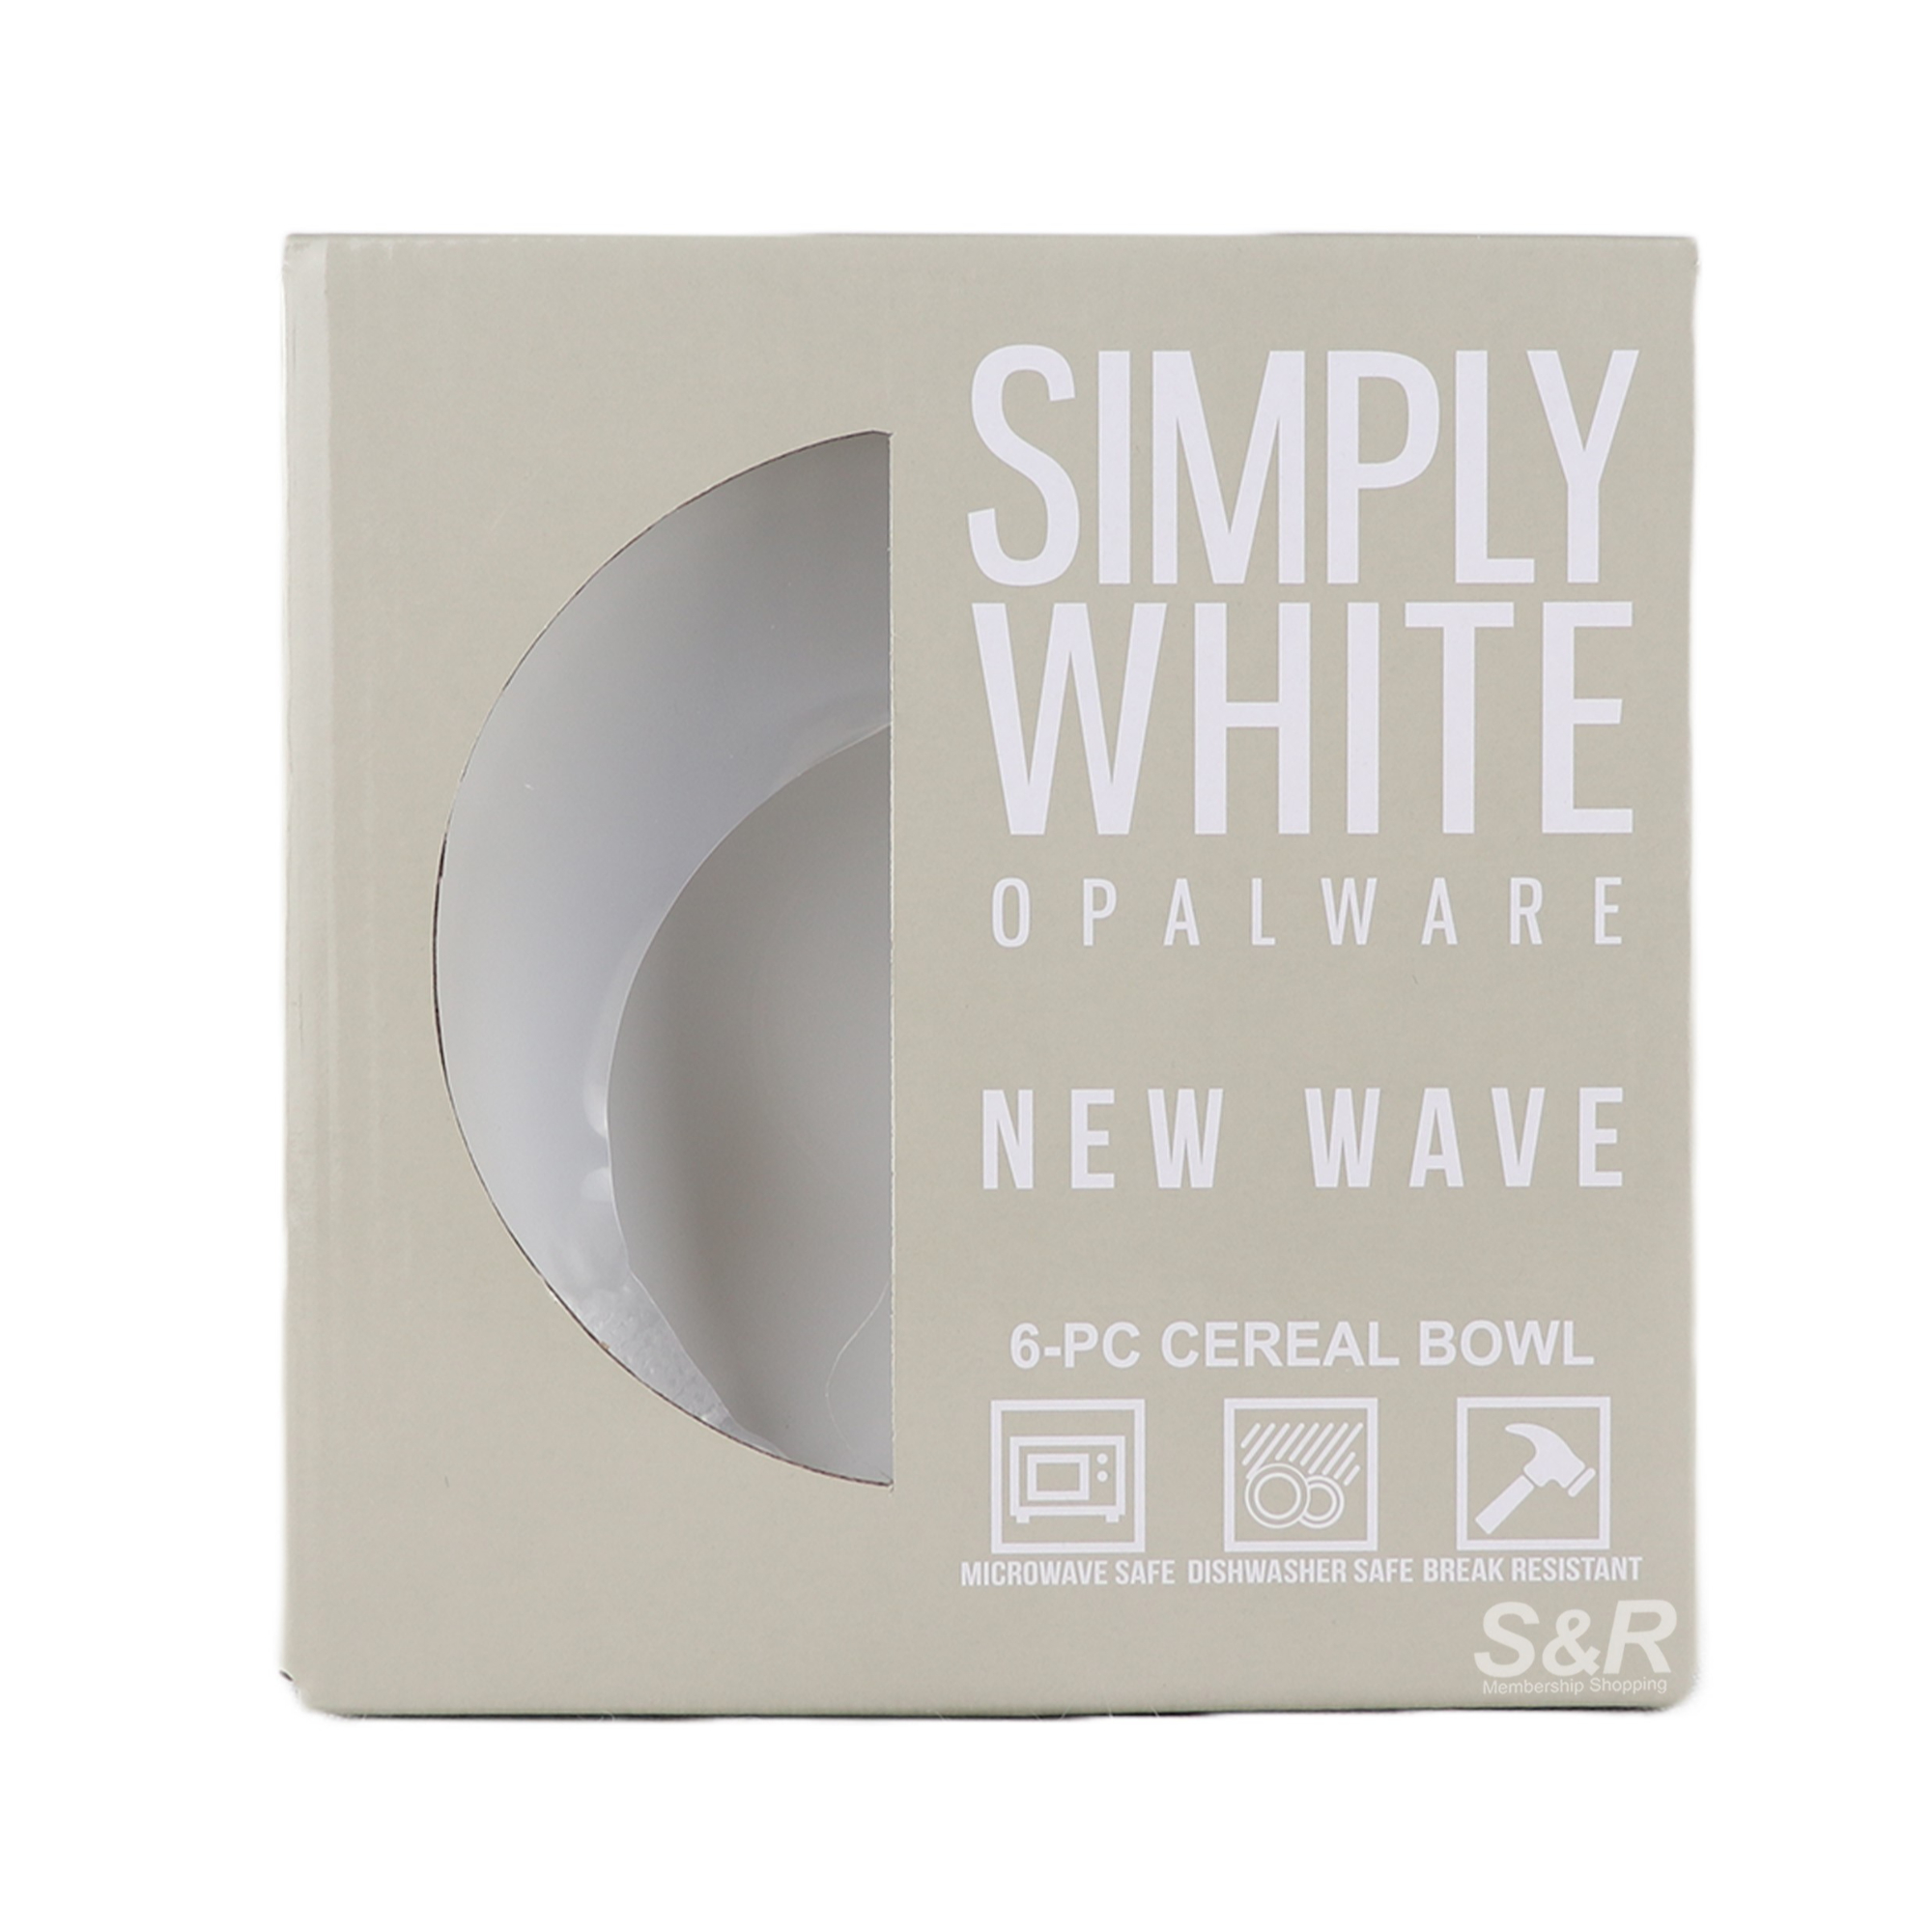 Simply White Opalware New Wave Cereal Bowl 6pcs